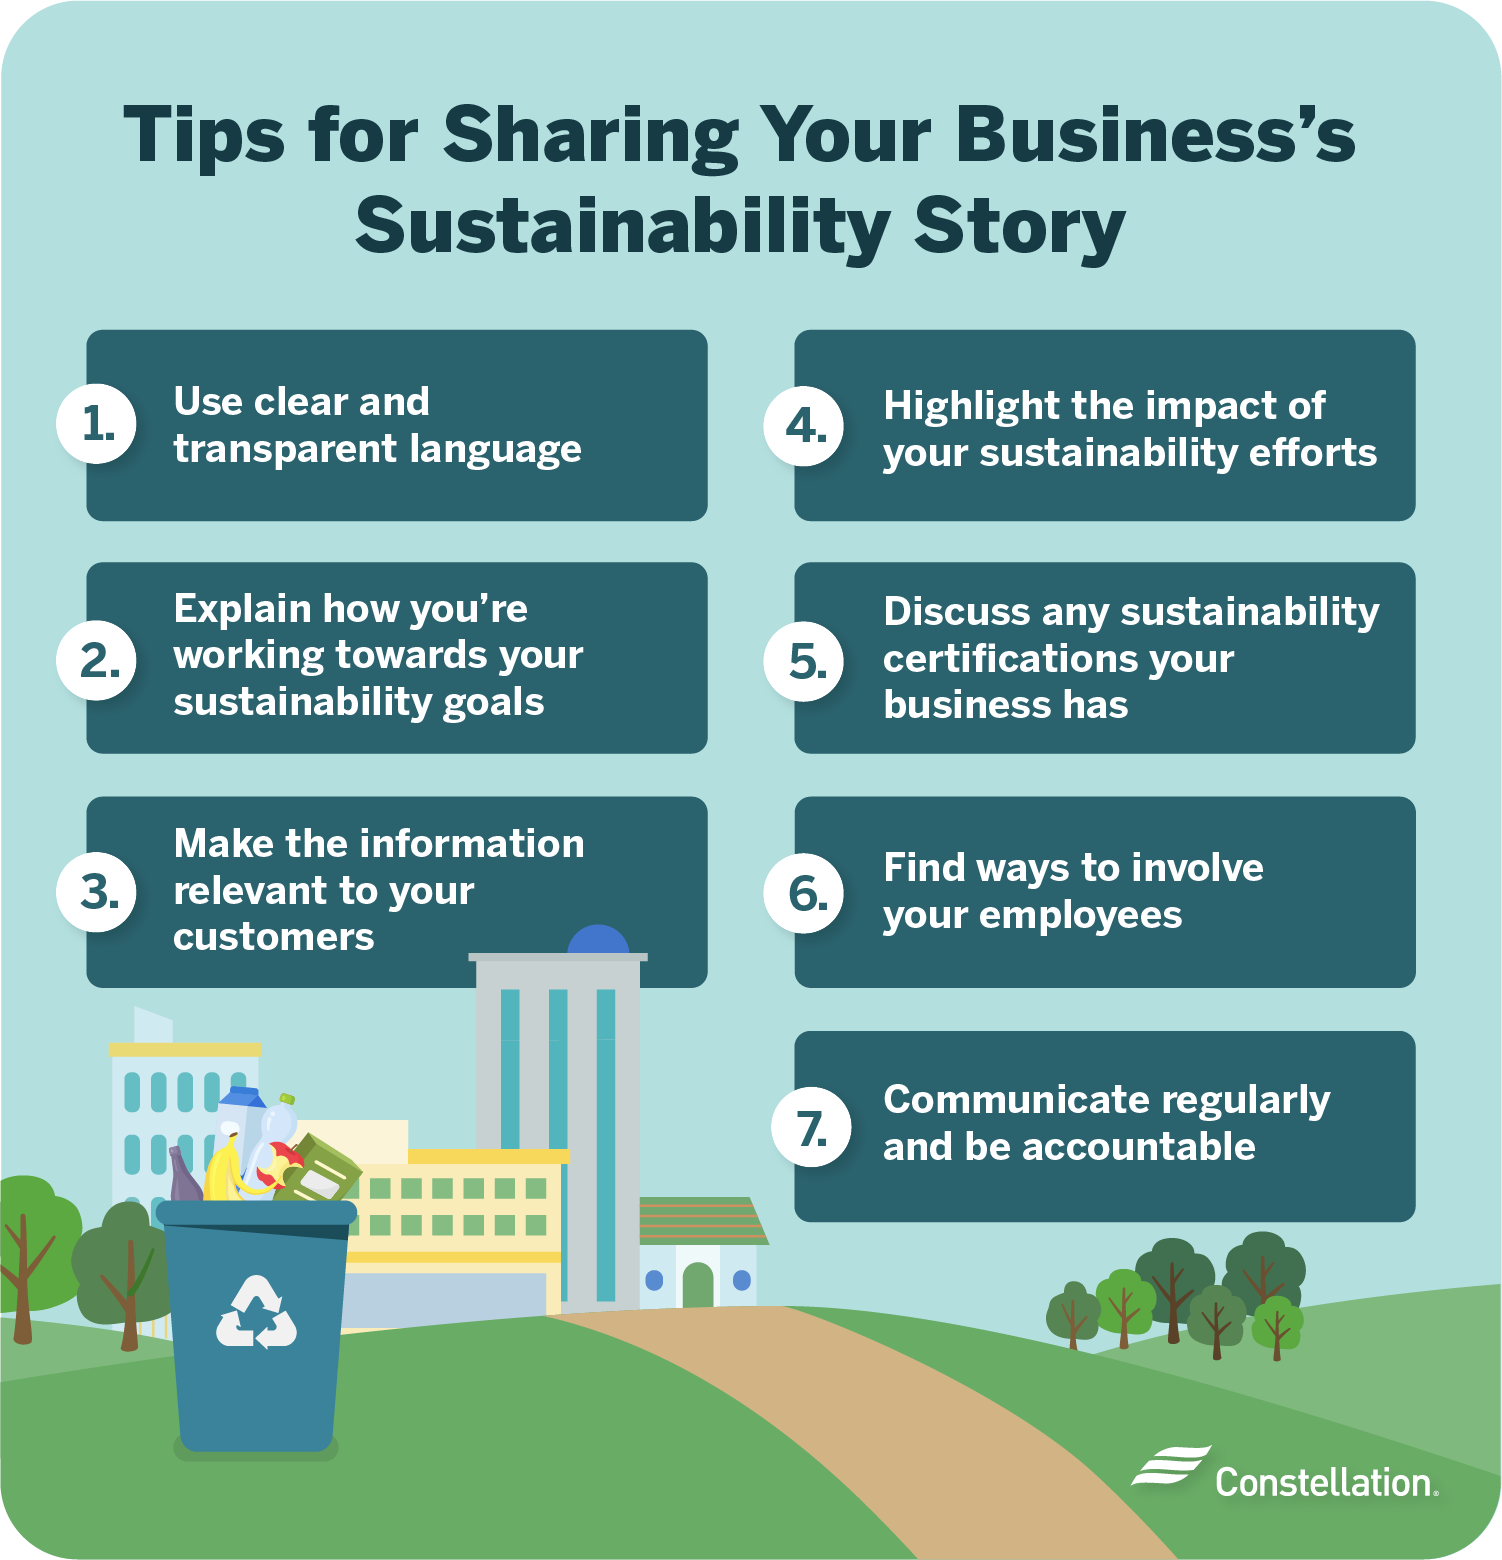 Tips for sharing your business sustainability story.